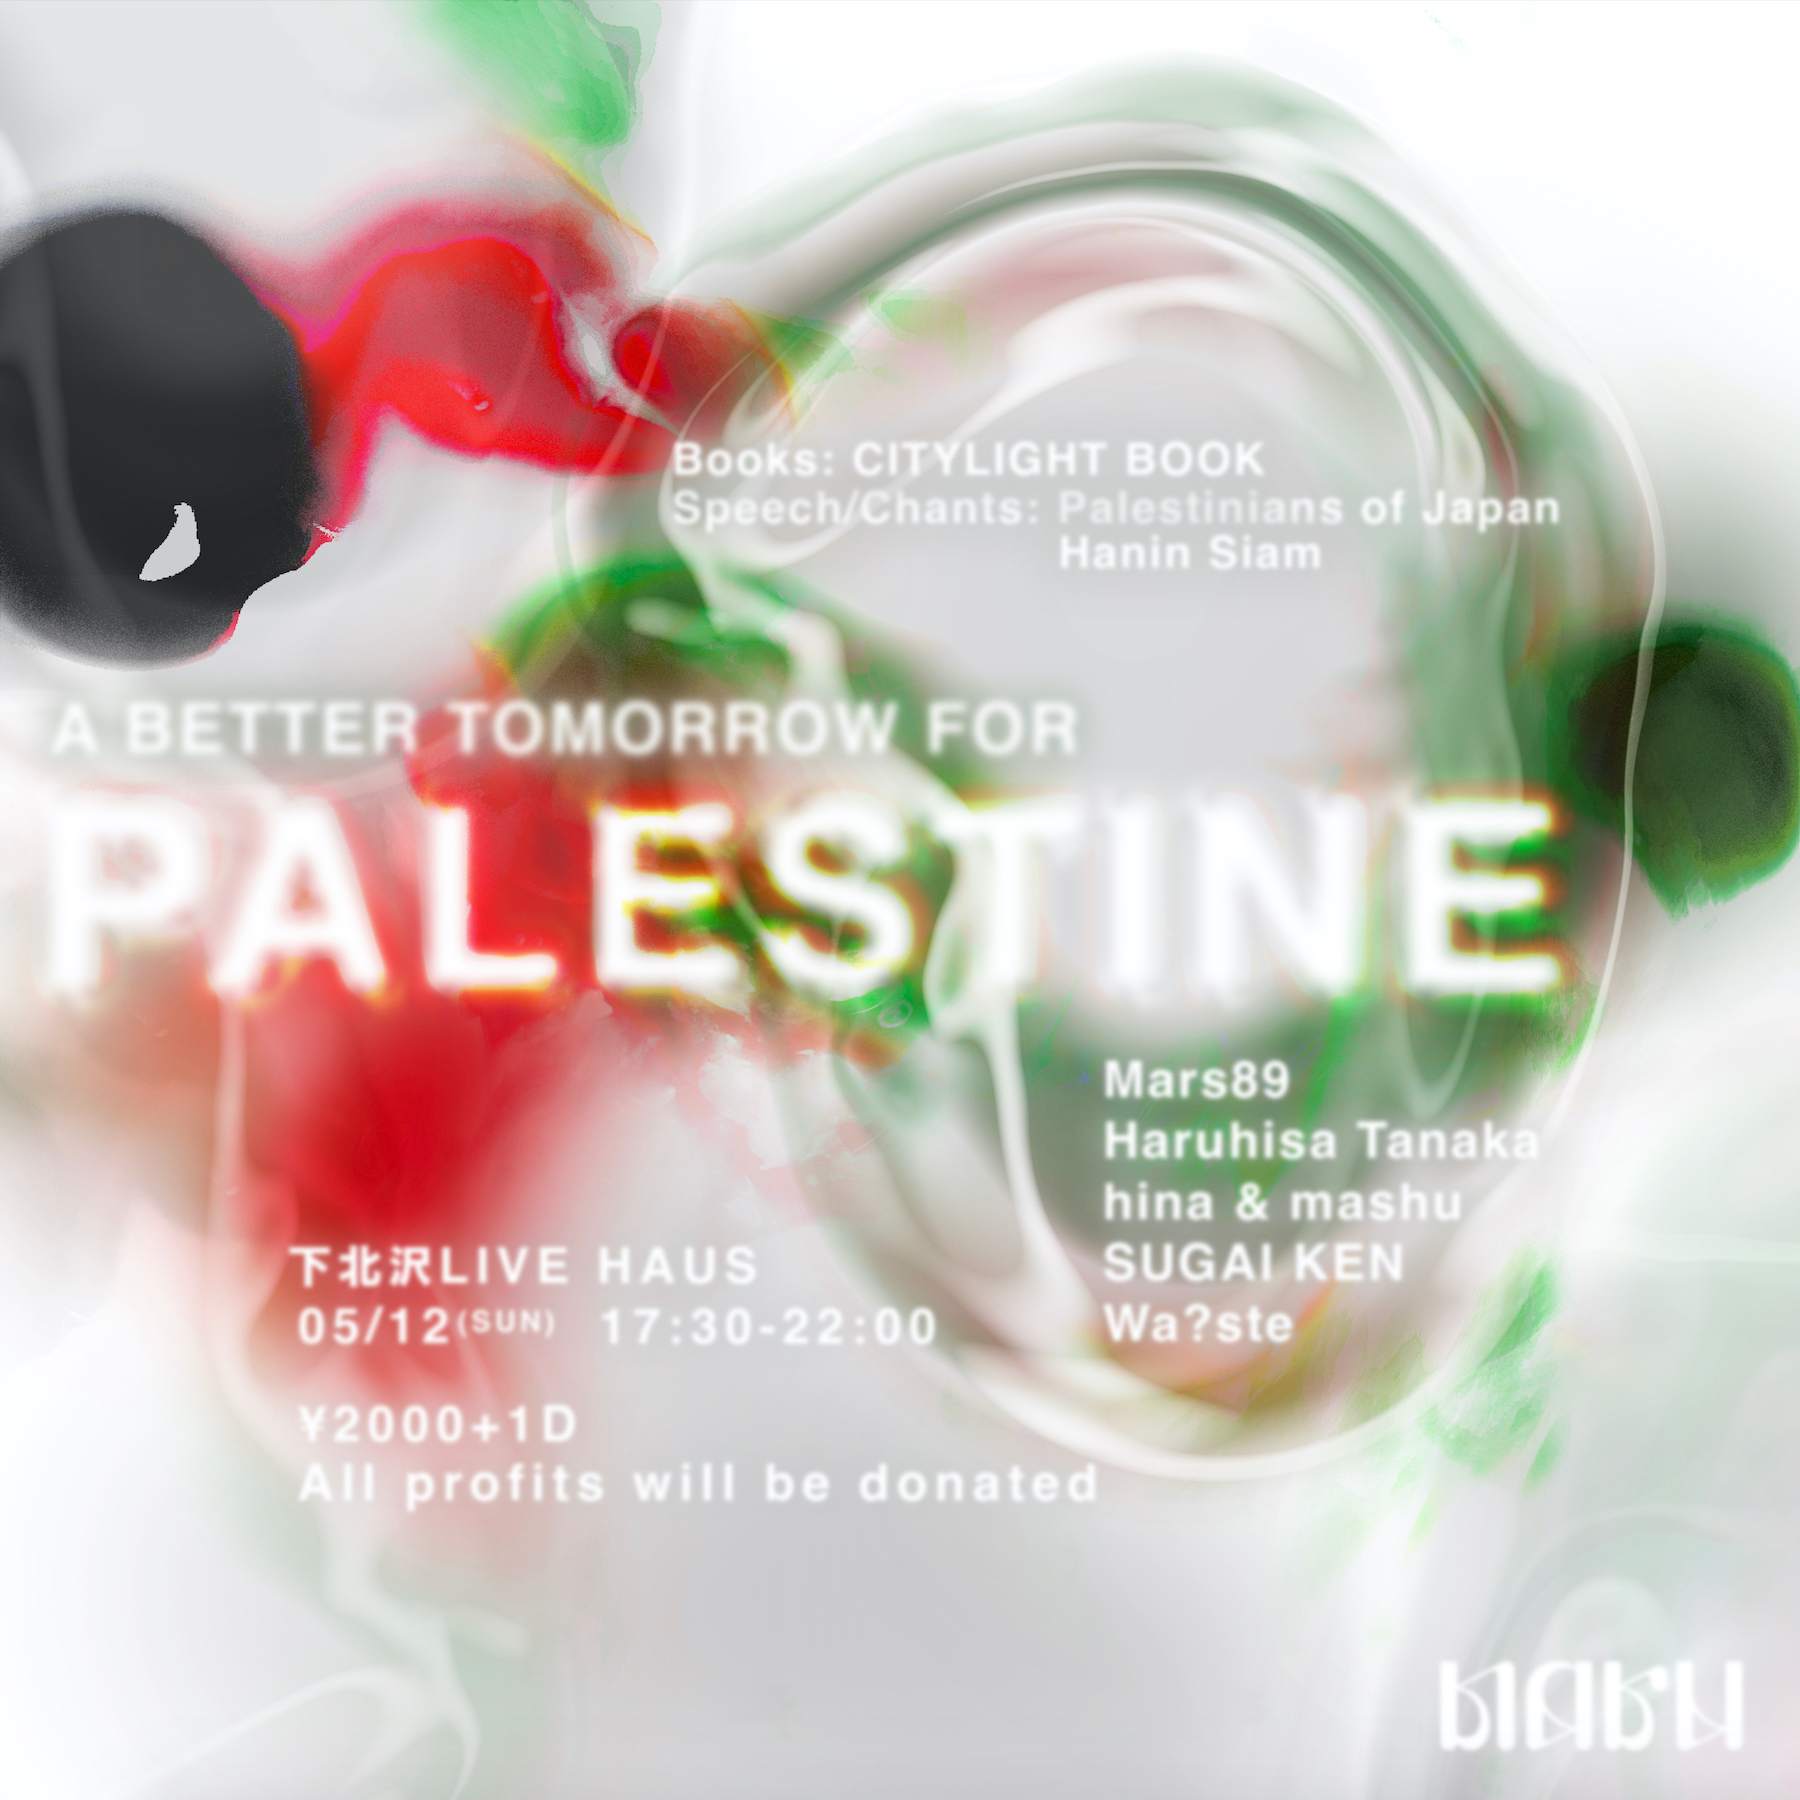 A Better Tomorrow for Palestine - Página frontal